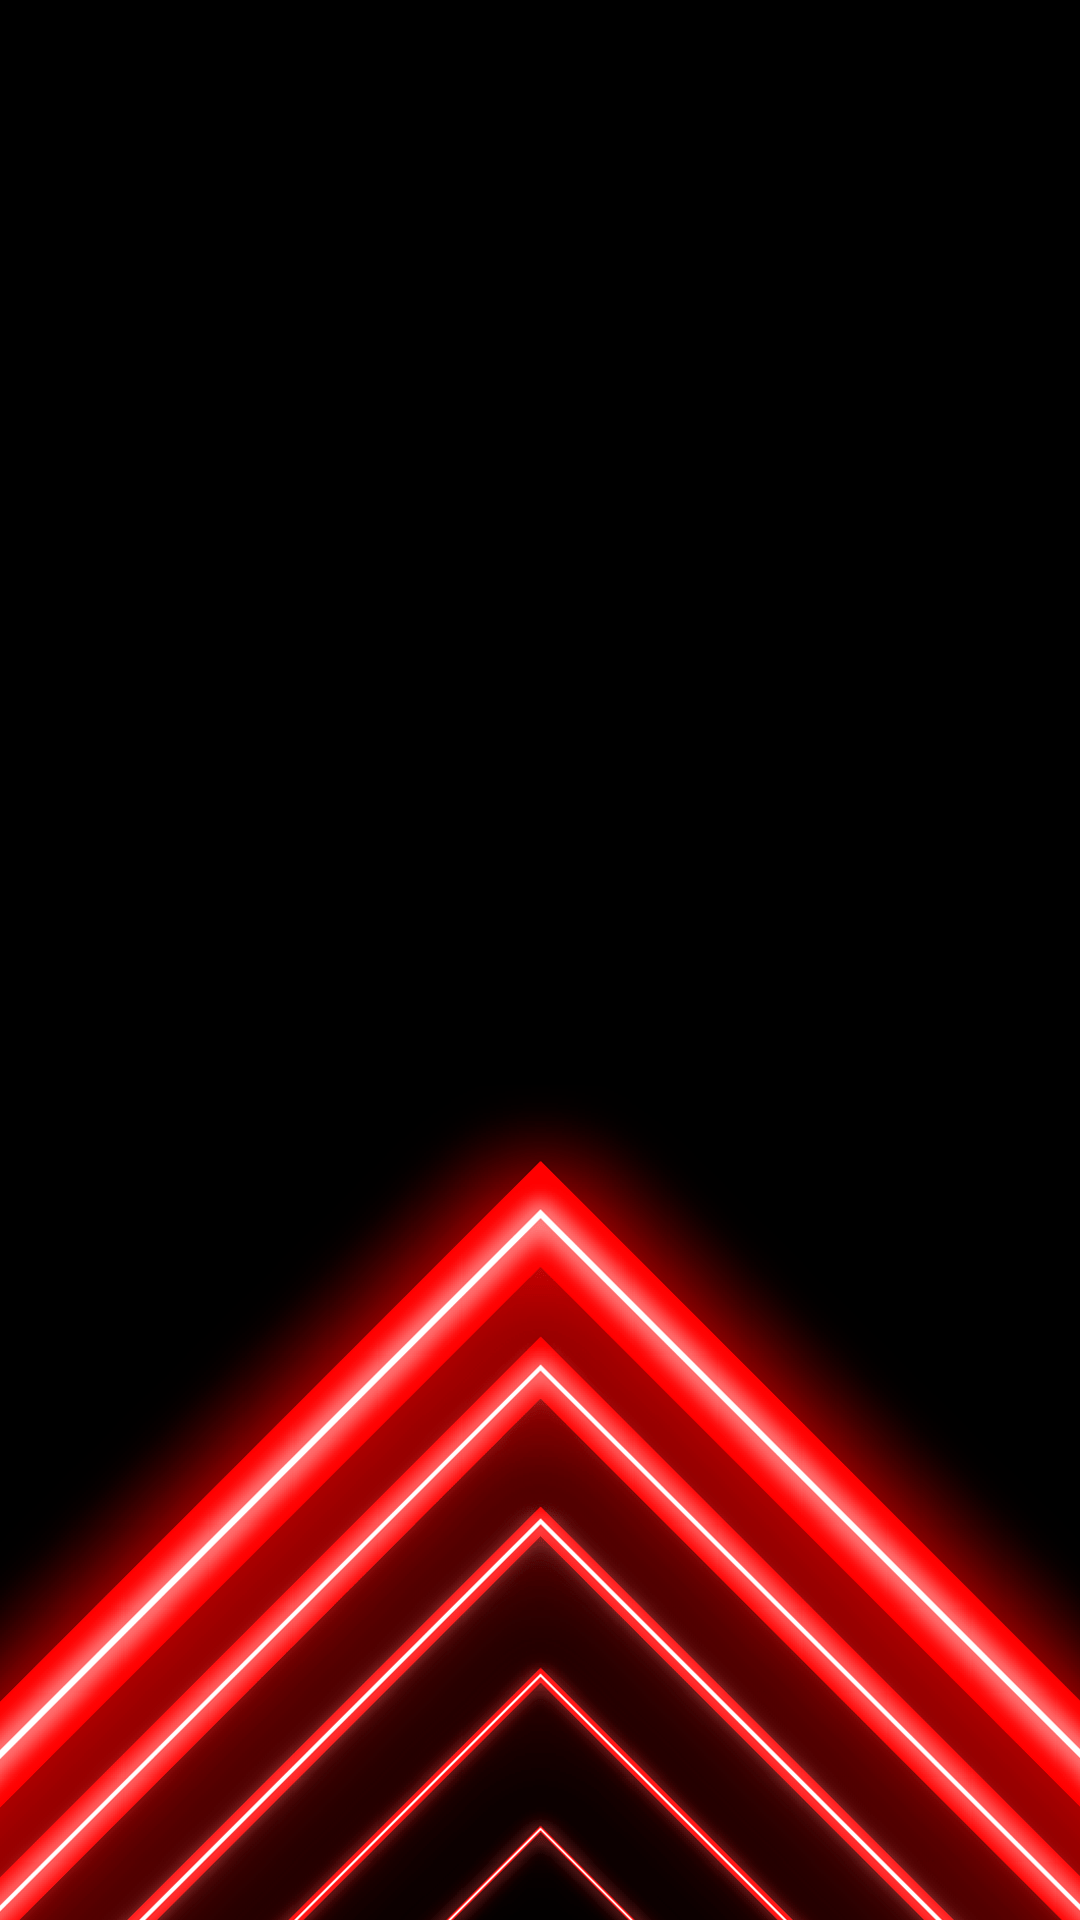 Red and Black Amoled Phone Wallpaper 4K For Tech